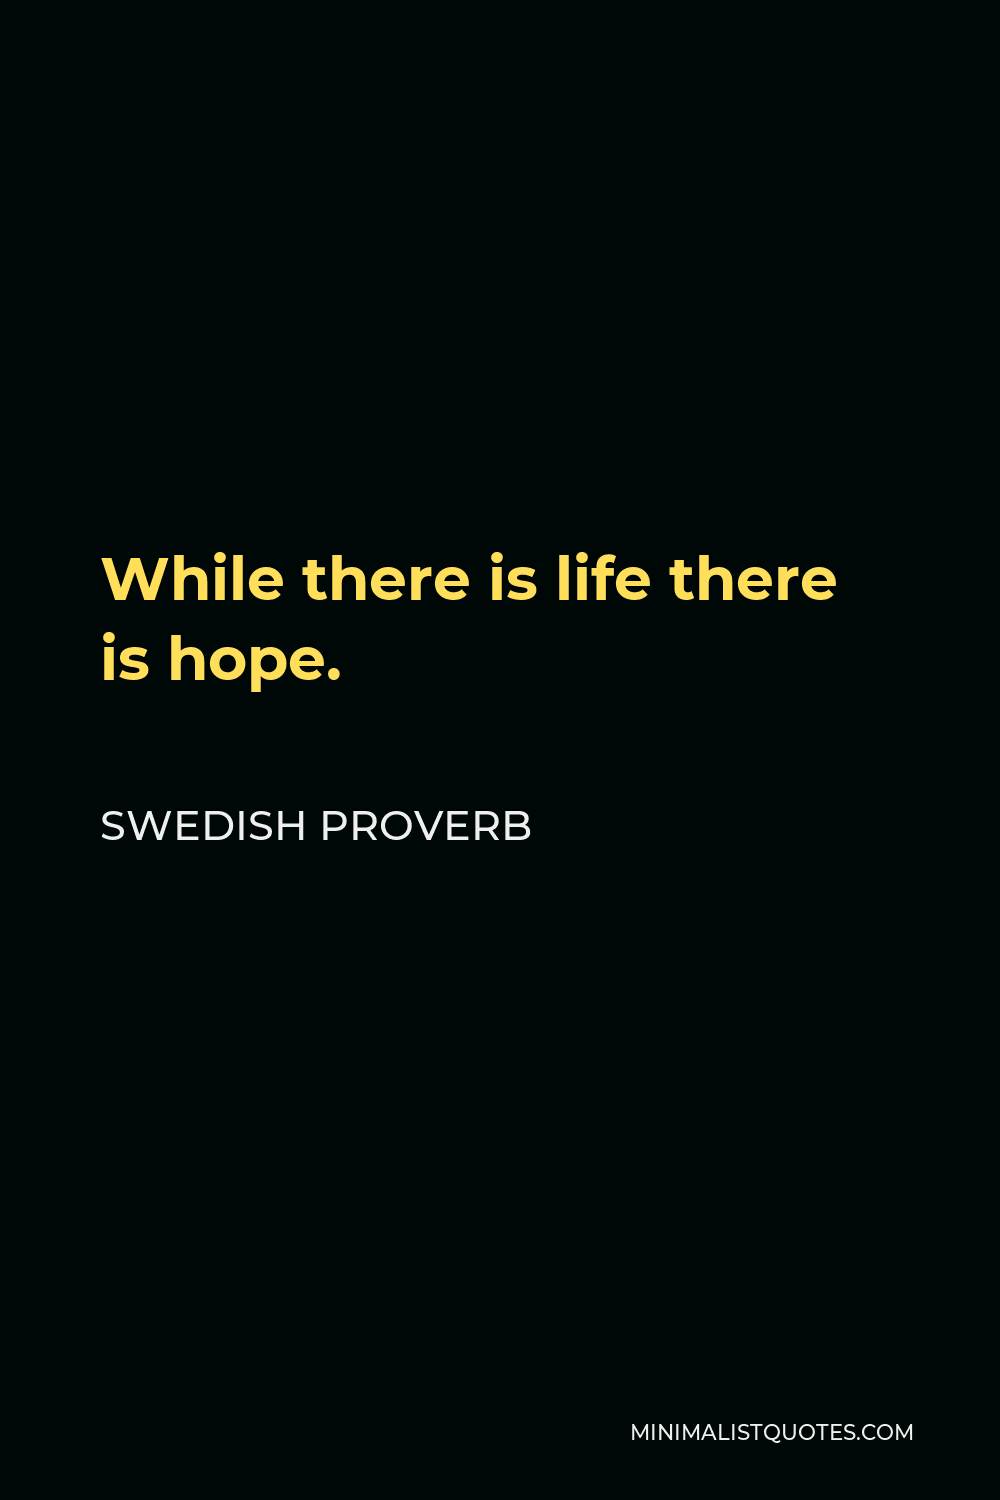 Swedish Proverb Quote - While there is life there is hope.